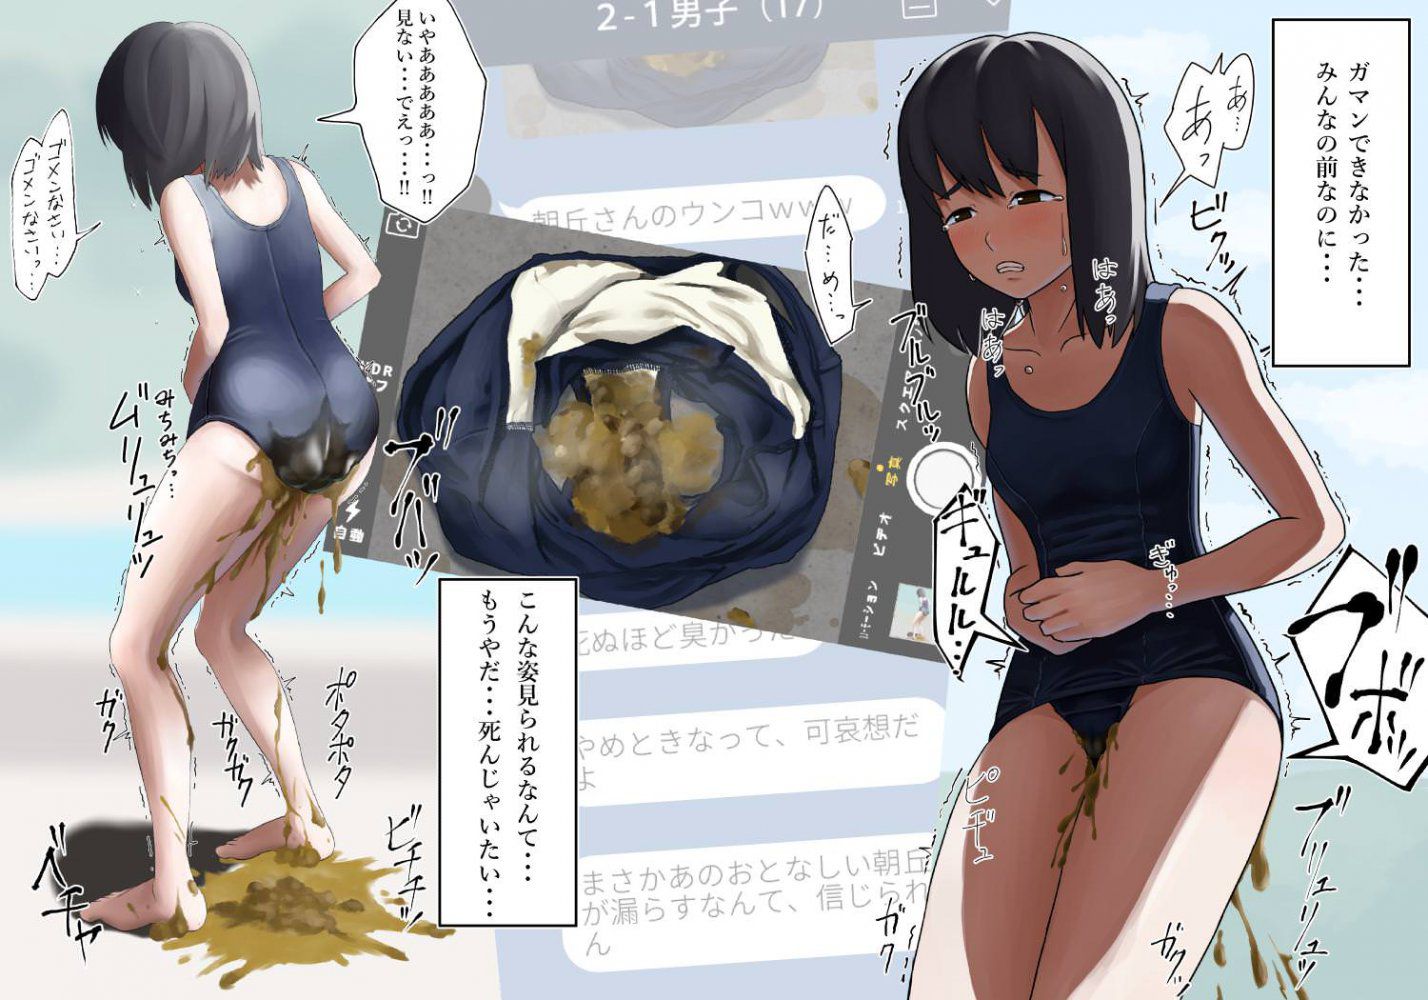 [Ero] sle that the secondary image that a girl puts out the feces pleasantly gathers 38